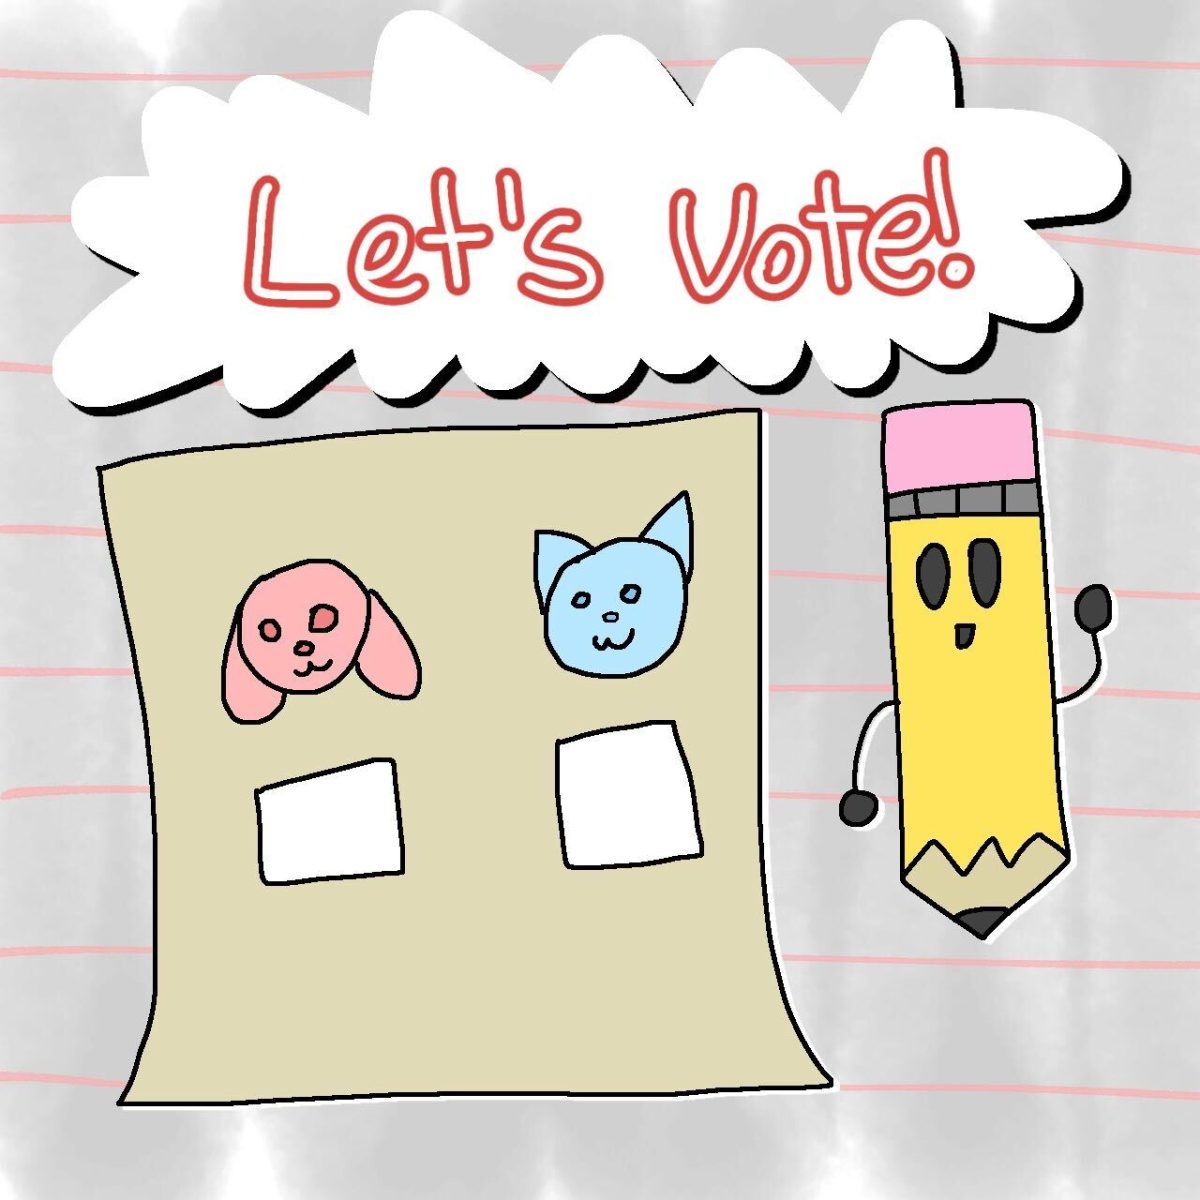 A+personified+pencil+raises+a+fist+next+to+a+voting+ballot+featuring+a+red+dog+and+a+blue+cat+beneath+the+words%3A+%E2%80%9CLet%E2%80%99s+Vote%21%E2%80%9D+Voting+is+critical+to+democracy+and+should+be+mandatory+in+the+United+States.+%28Mary+Ngo+%7C+Northern+Star%29